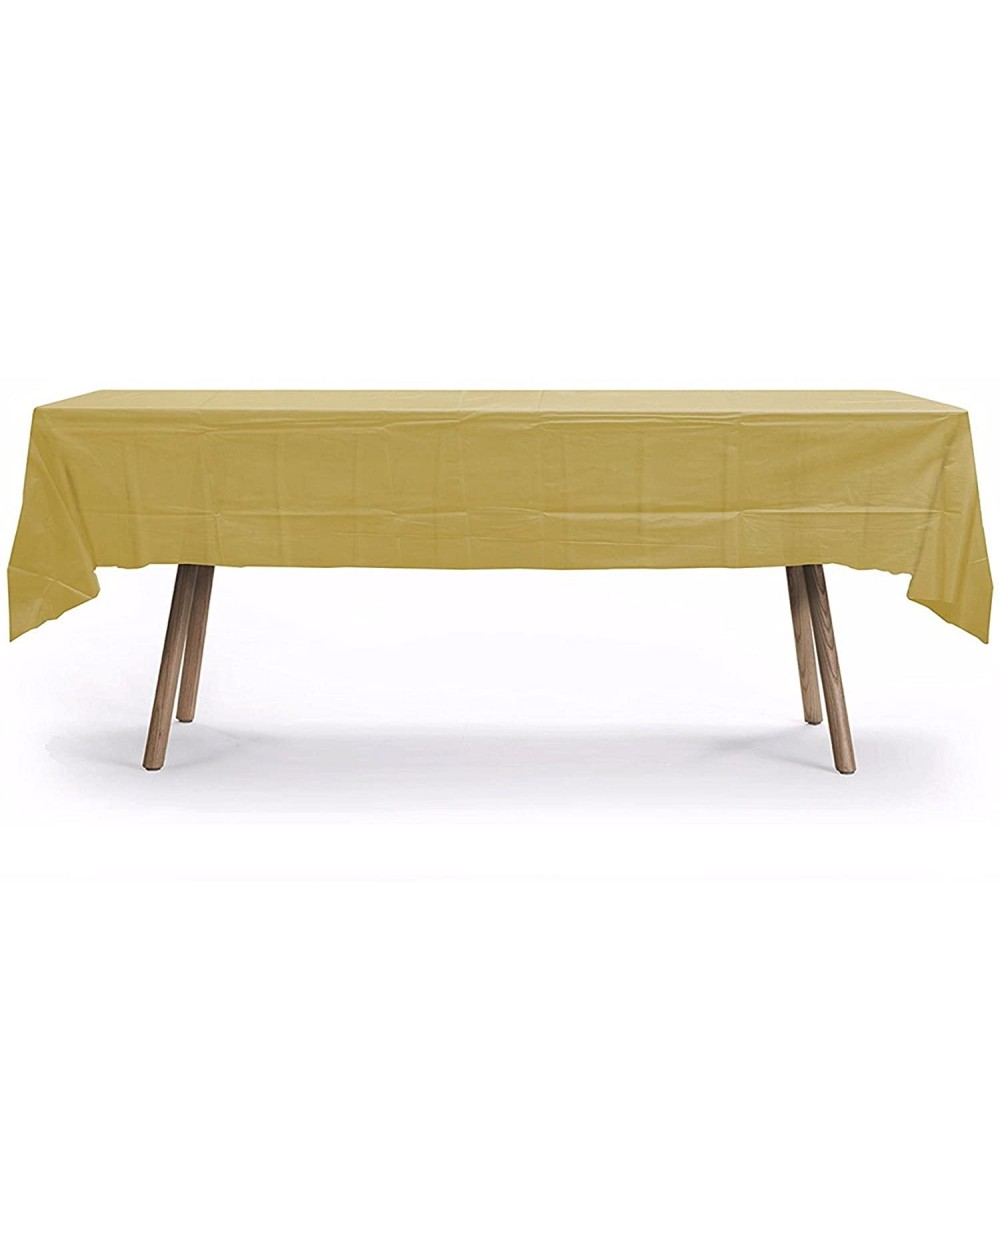 Tablecovers 6 Pack- 54" x 108" Gold Rectangular Plastic Table Cover- Plastic Table Cloth Reusable (PEVA) (Gold) - Gold - C318...